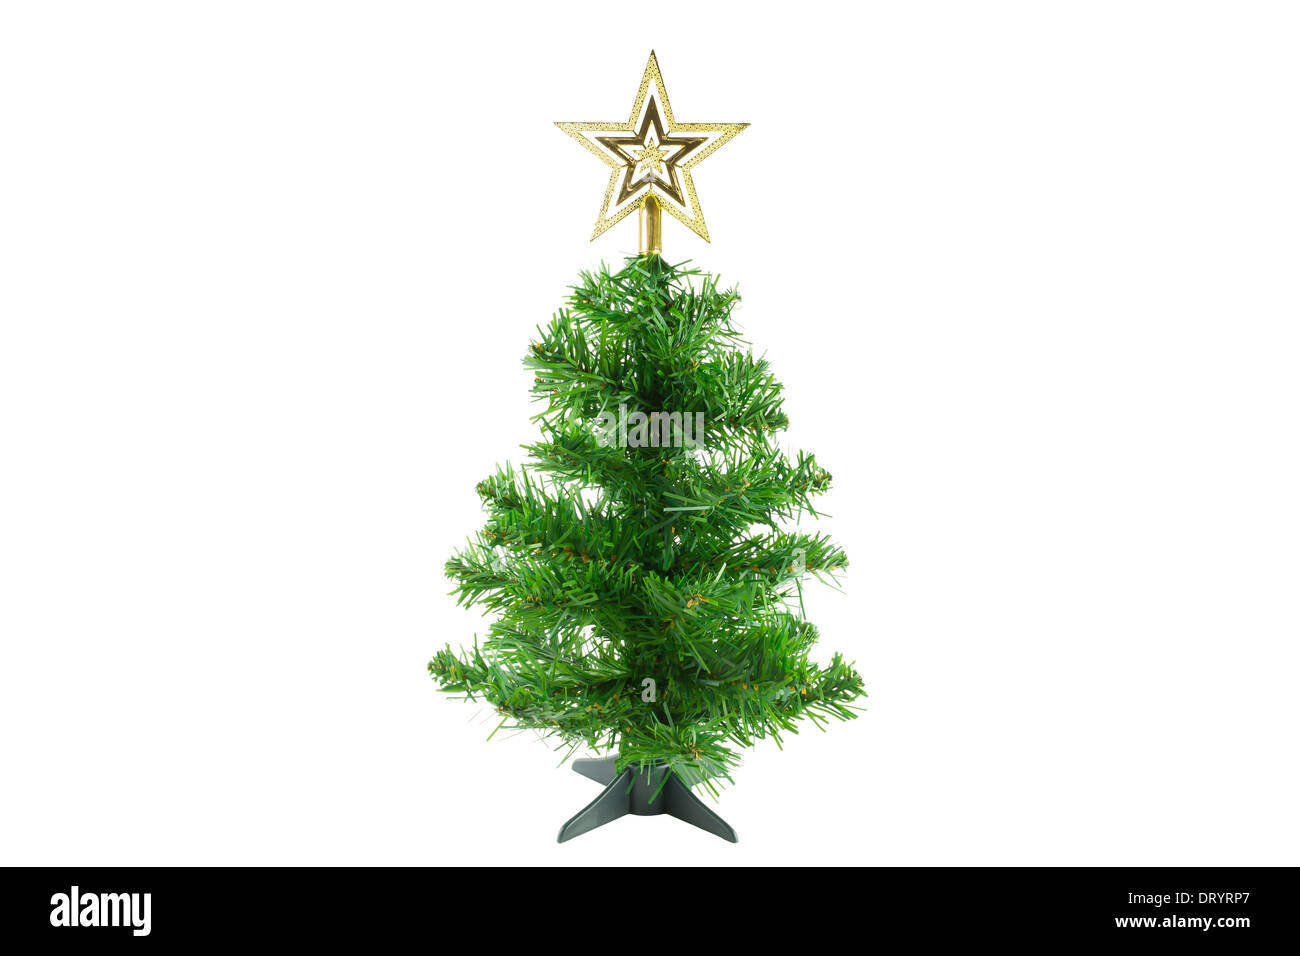 Christmas tree is decorated with gold star at top of tree. Decorated Christmas tree on white background. Stock Photo